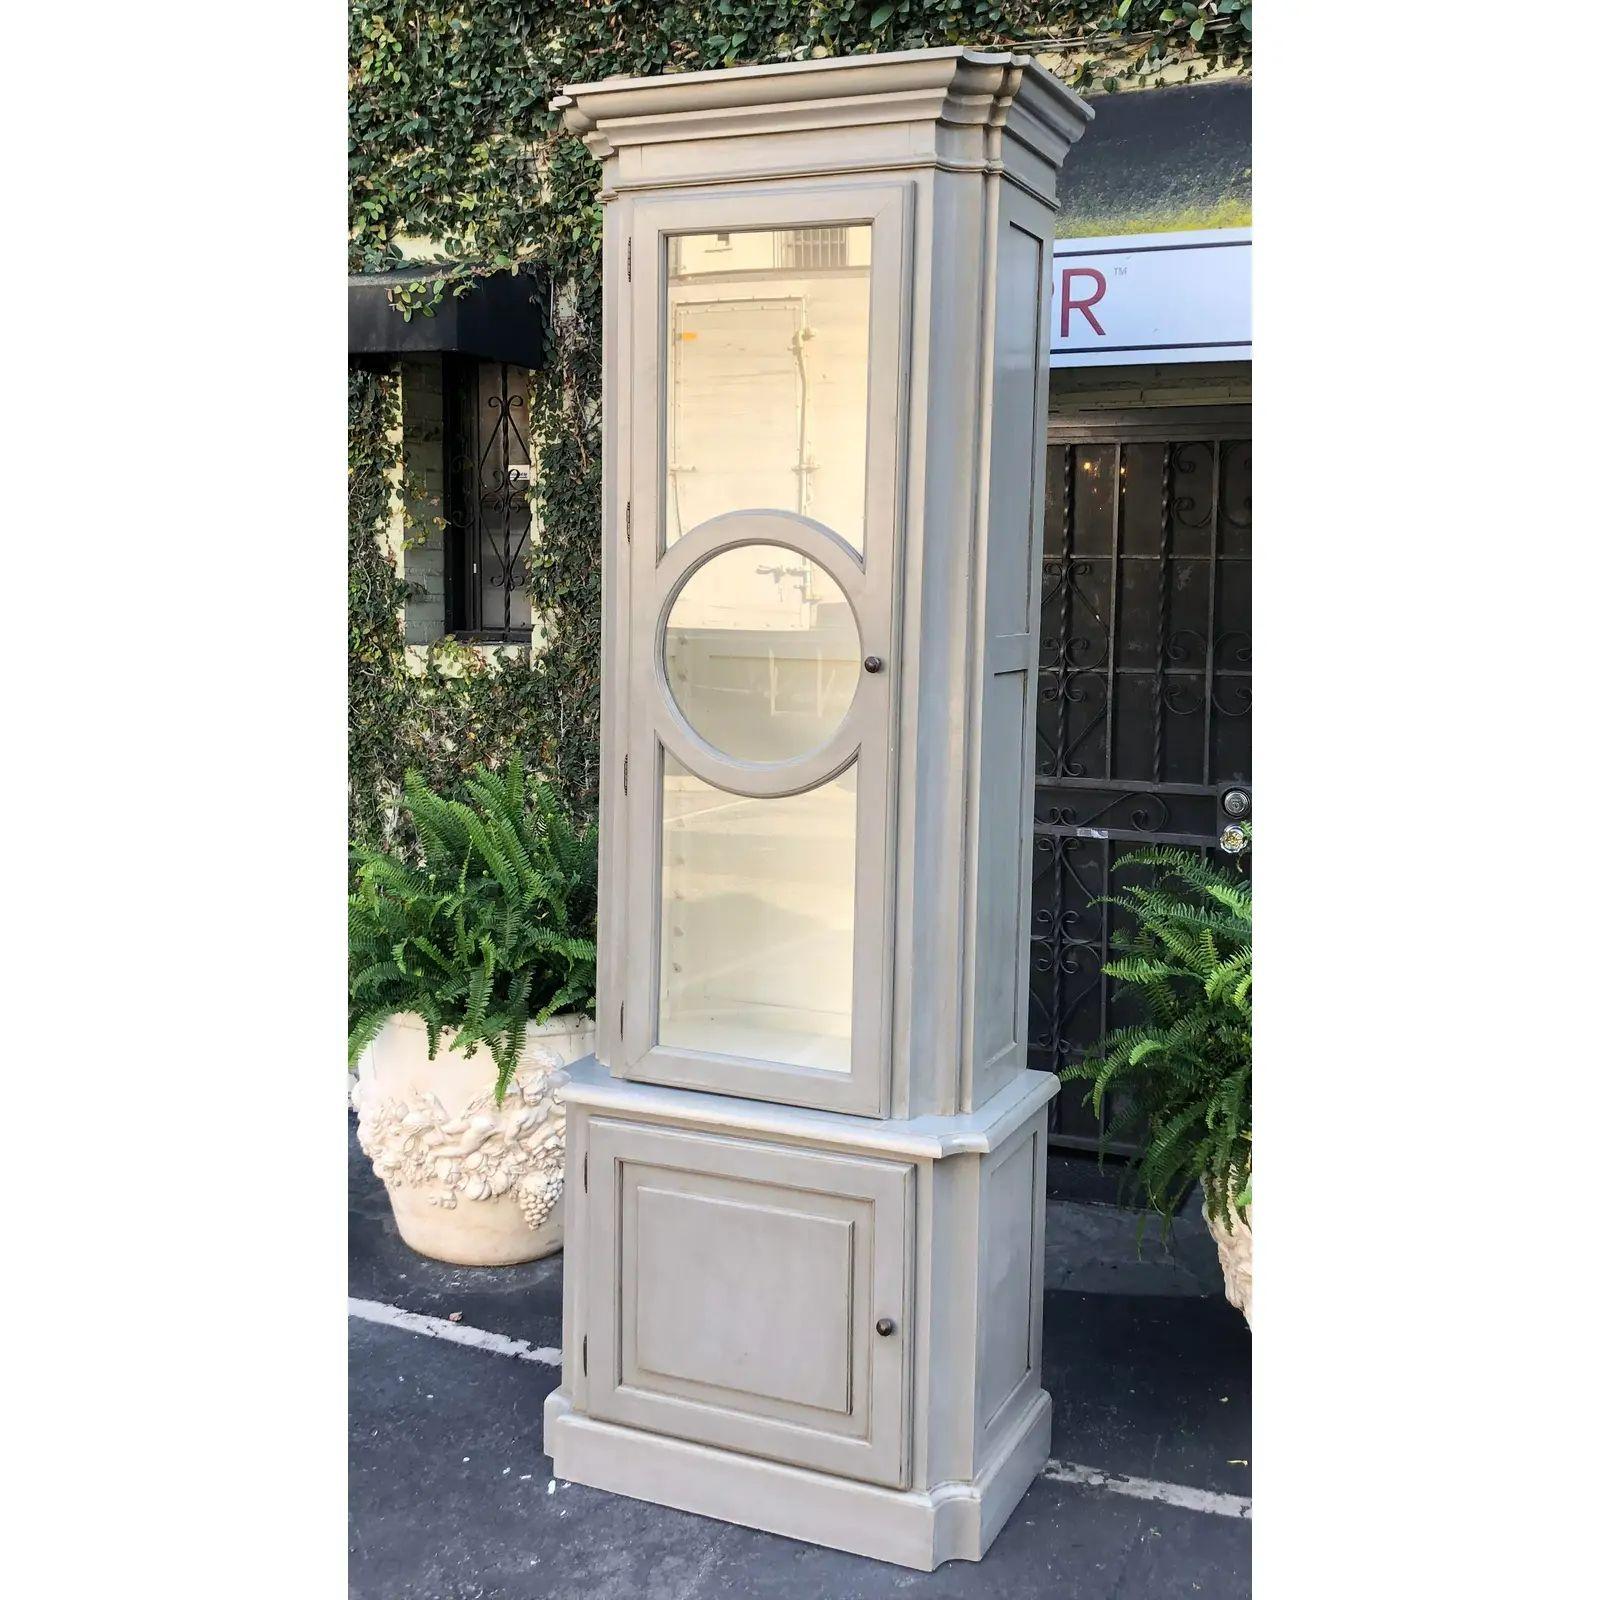 Vintage Hollywood Regency gray painted showcase
 
Additional information: 
Materials: Paint
Color: Gray
Place of Origin: France
Period: Mid 20th Century
Styles: Hollywood Regency
Item Type: Vintage, Antique or Pre-owned
Dimensions: 32.5